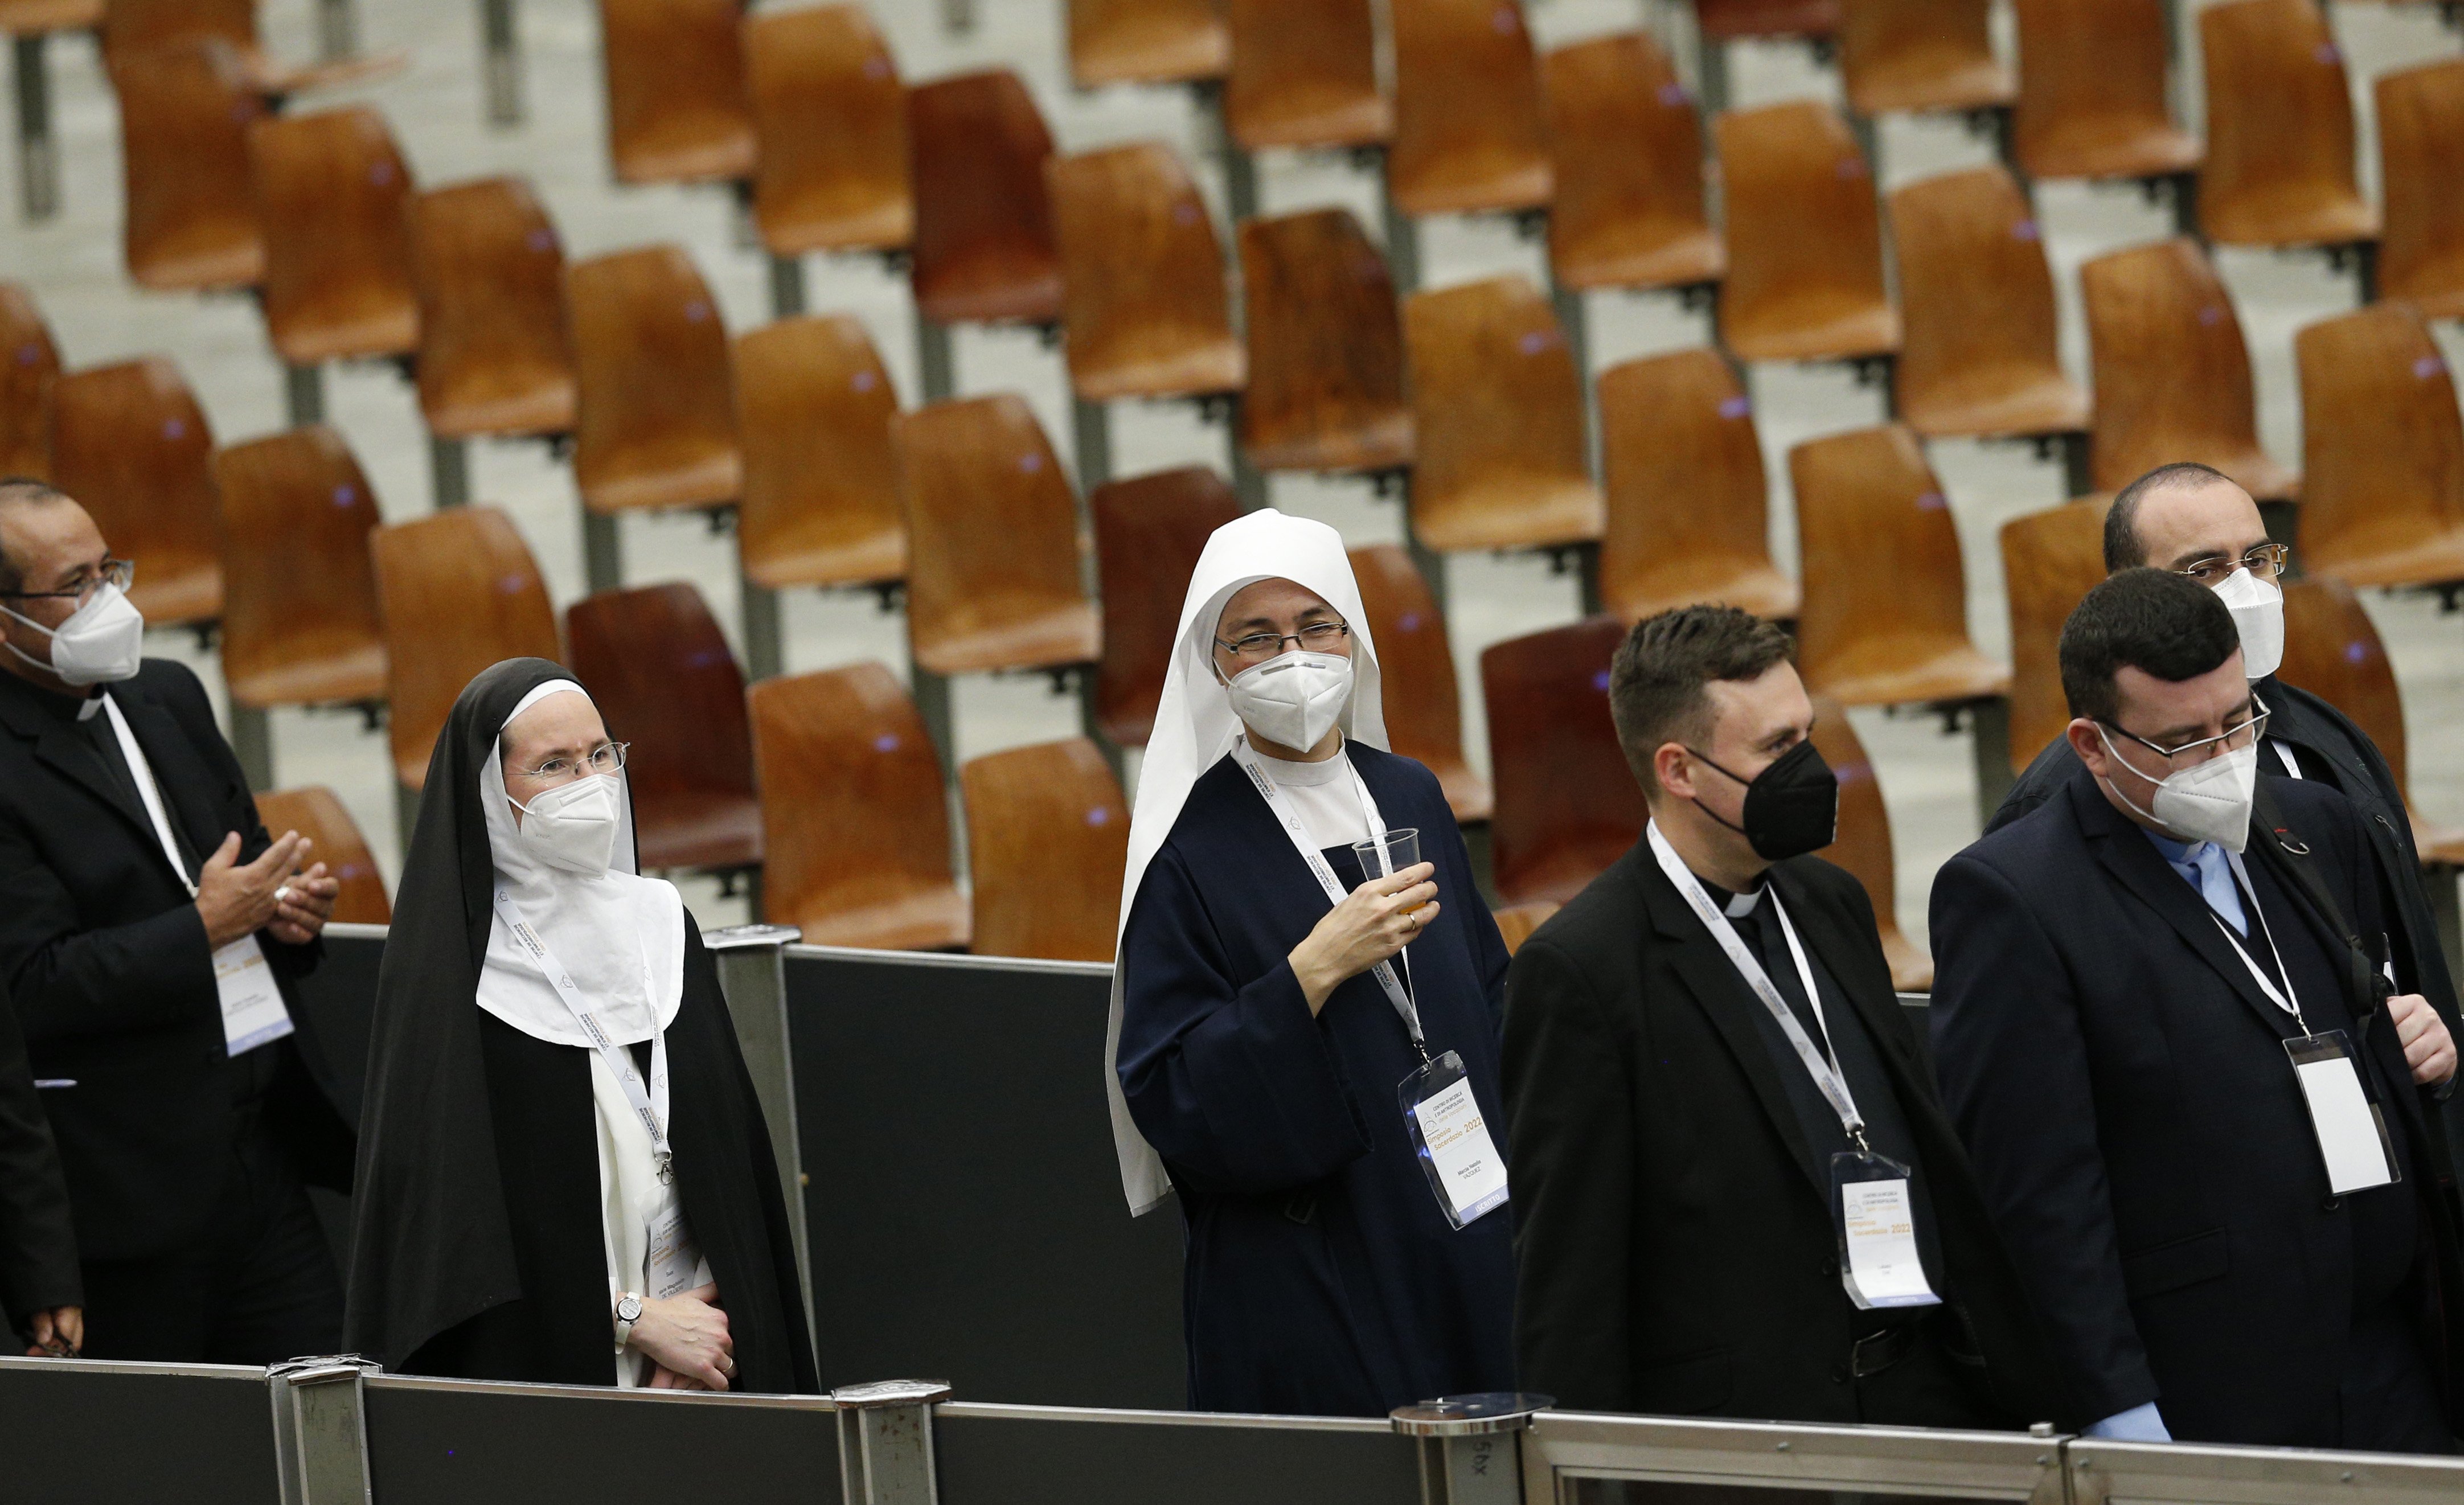 Participants return to their seats after a break during an international symposium on the priesthood at the Vatican Feb. 17, 2022. (CNS photo/Paul Haring)